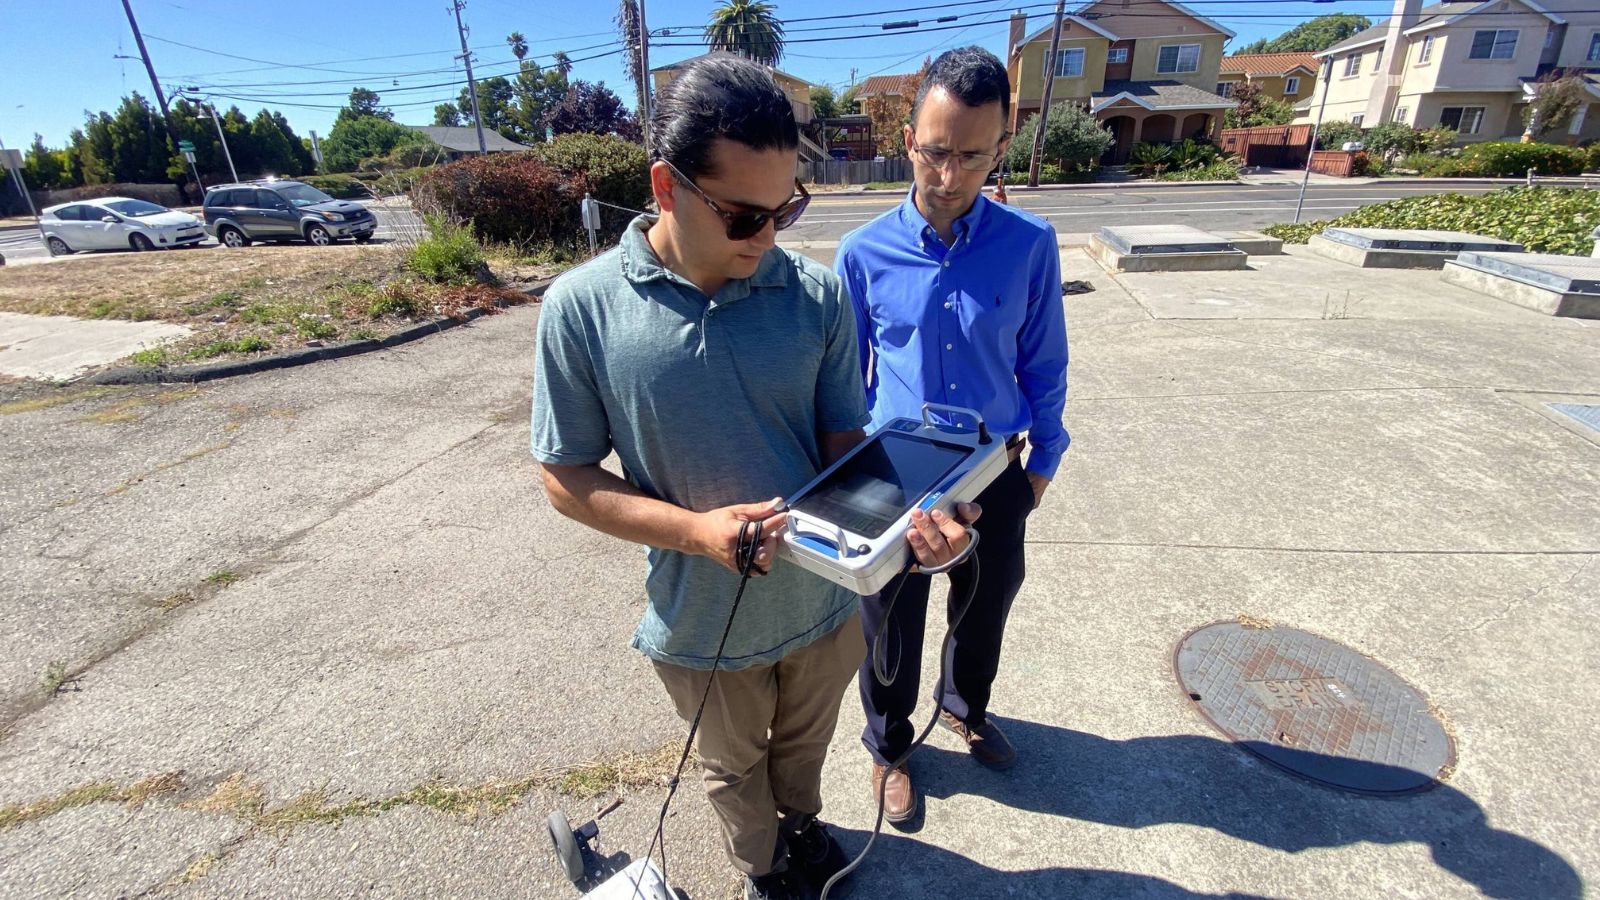 Water resources engineering professor Hassan Davani speaks with KQED on San Leandro sea level rise and how his research addresses it.